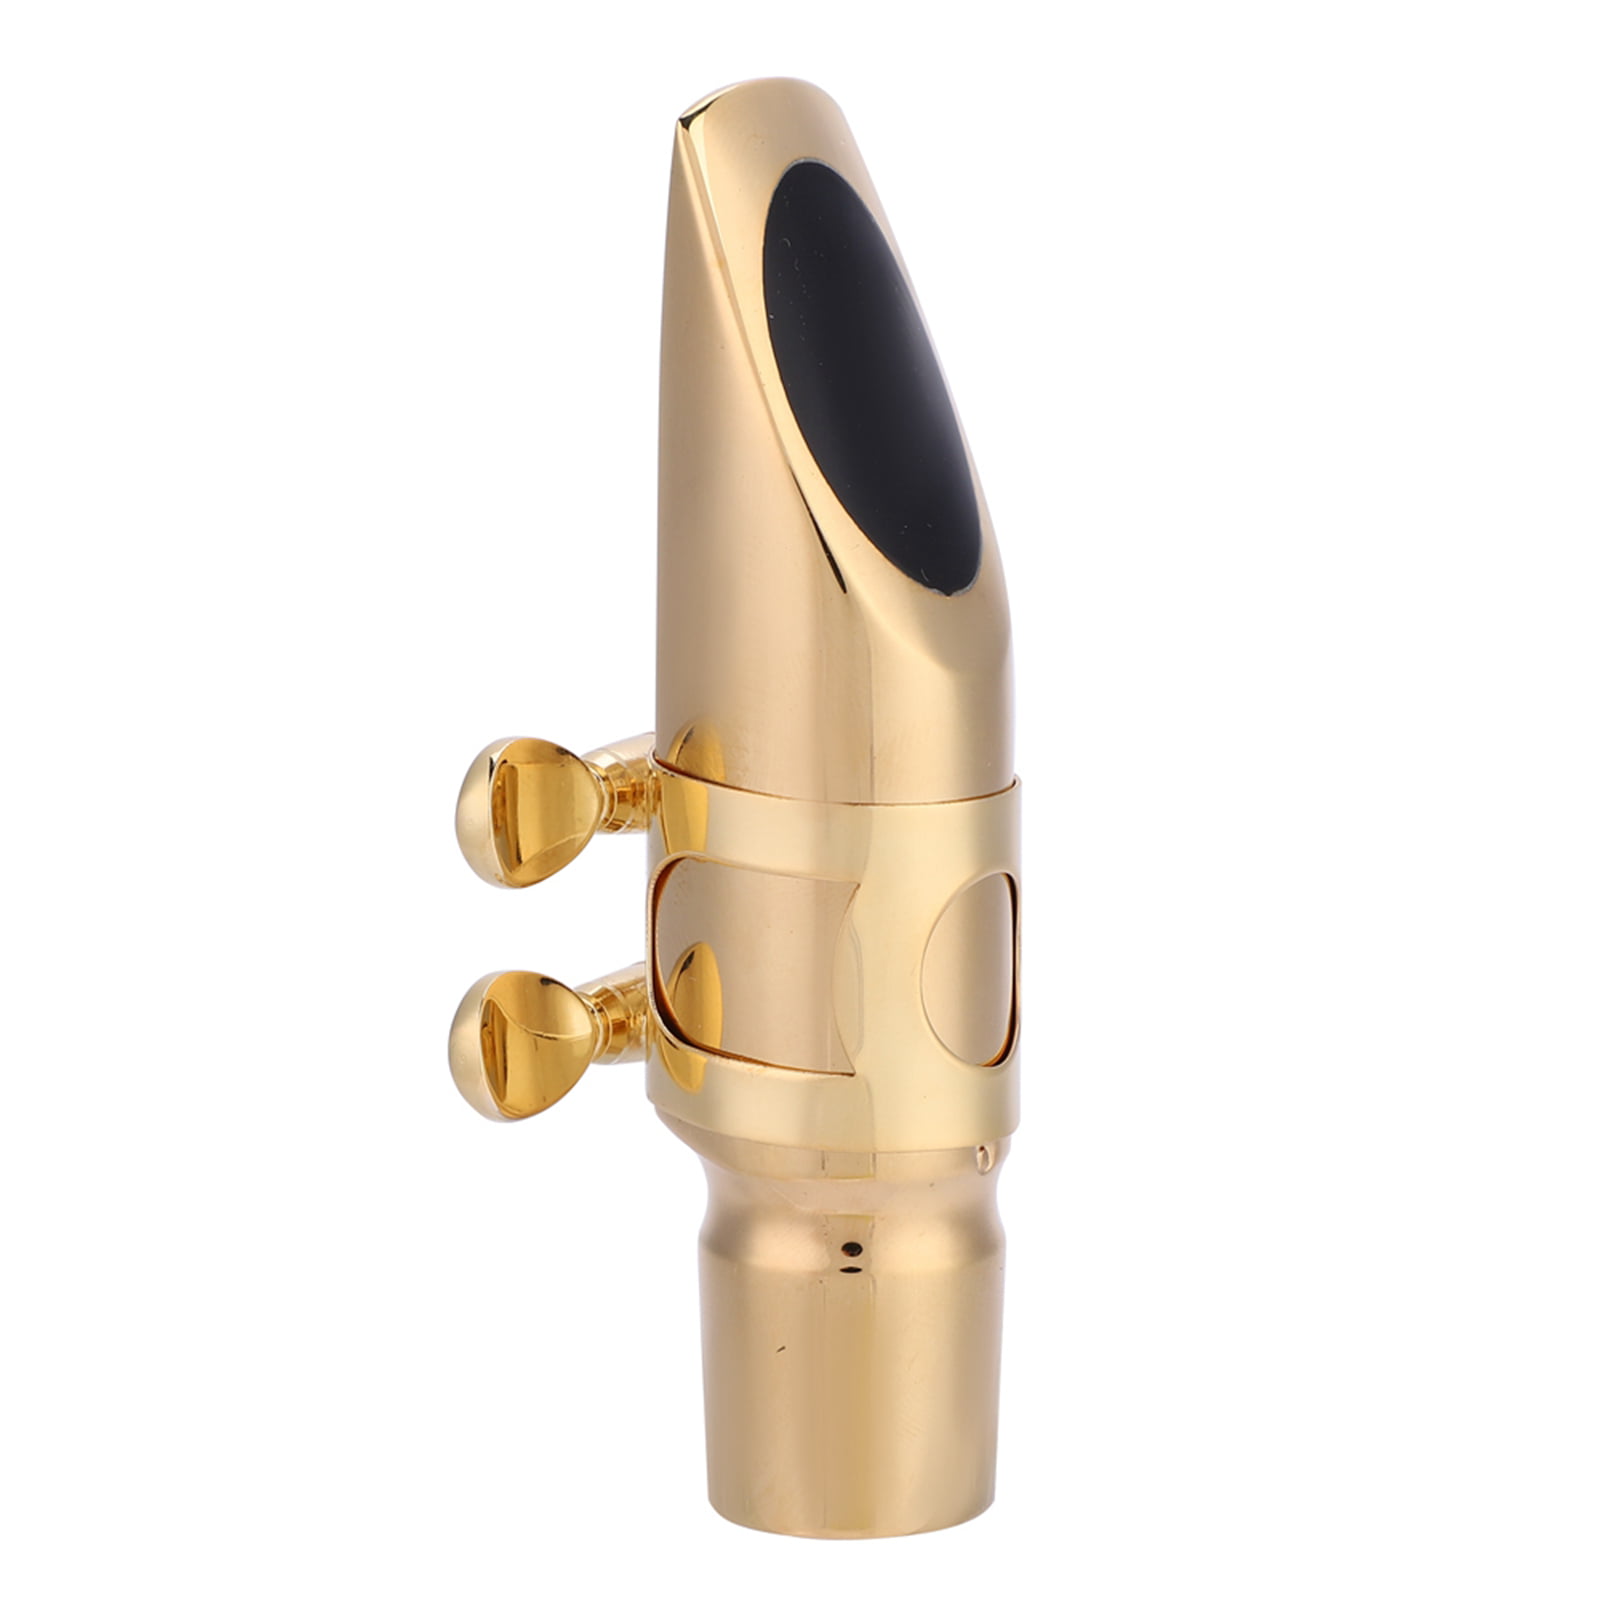 Delicate Sax Mouthpiece Simple Installation Fine Workmanship Alto Sax Mouthpiece Brass for Playing Jazz Saxophone Music Lovers Stage Performances 